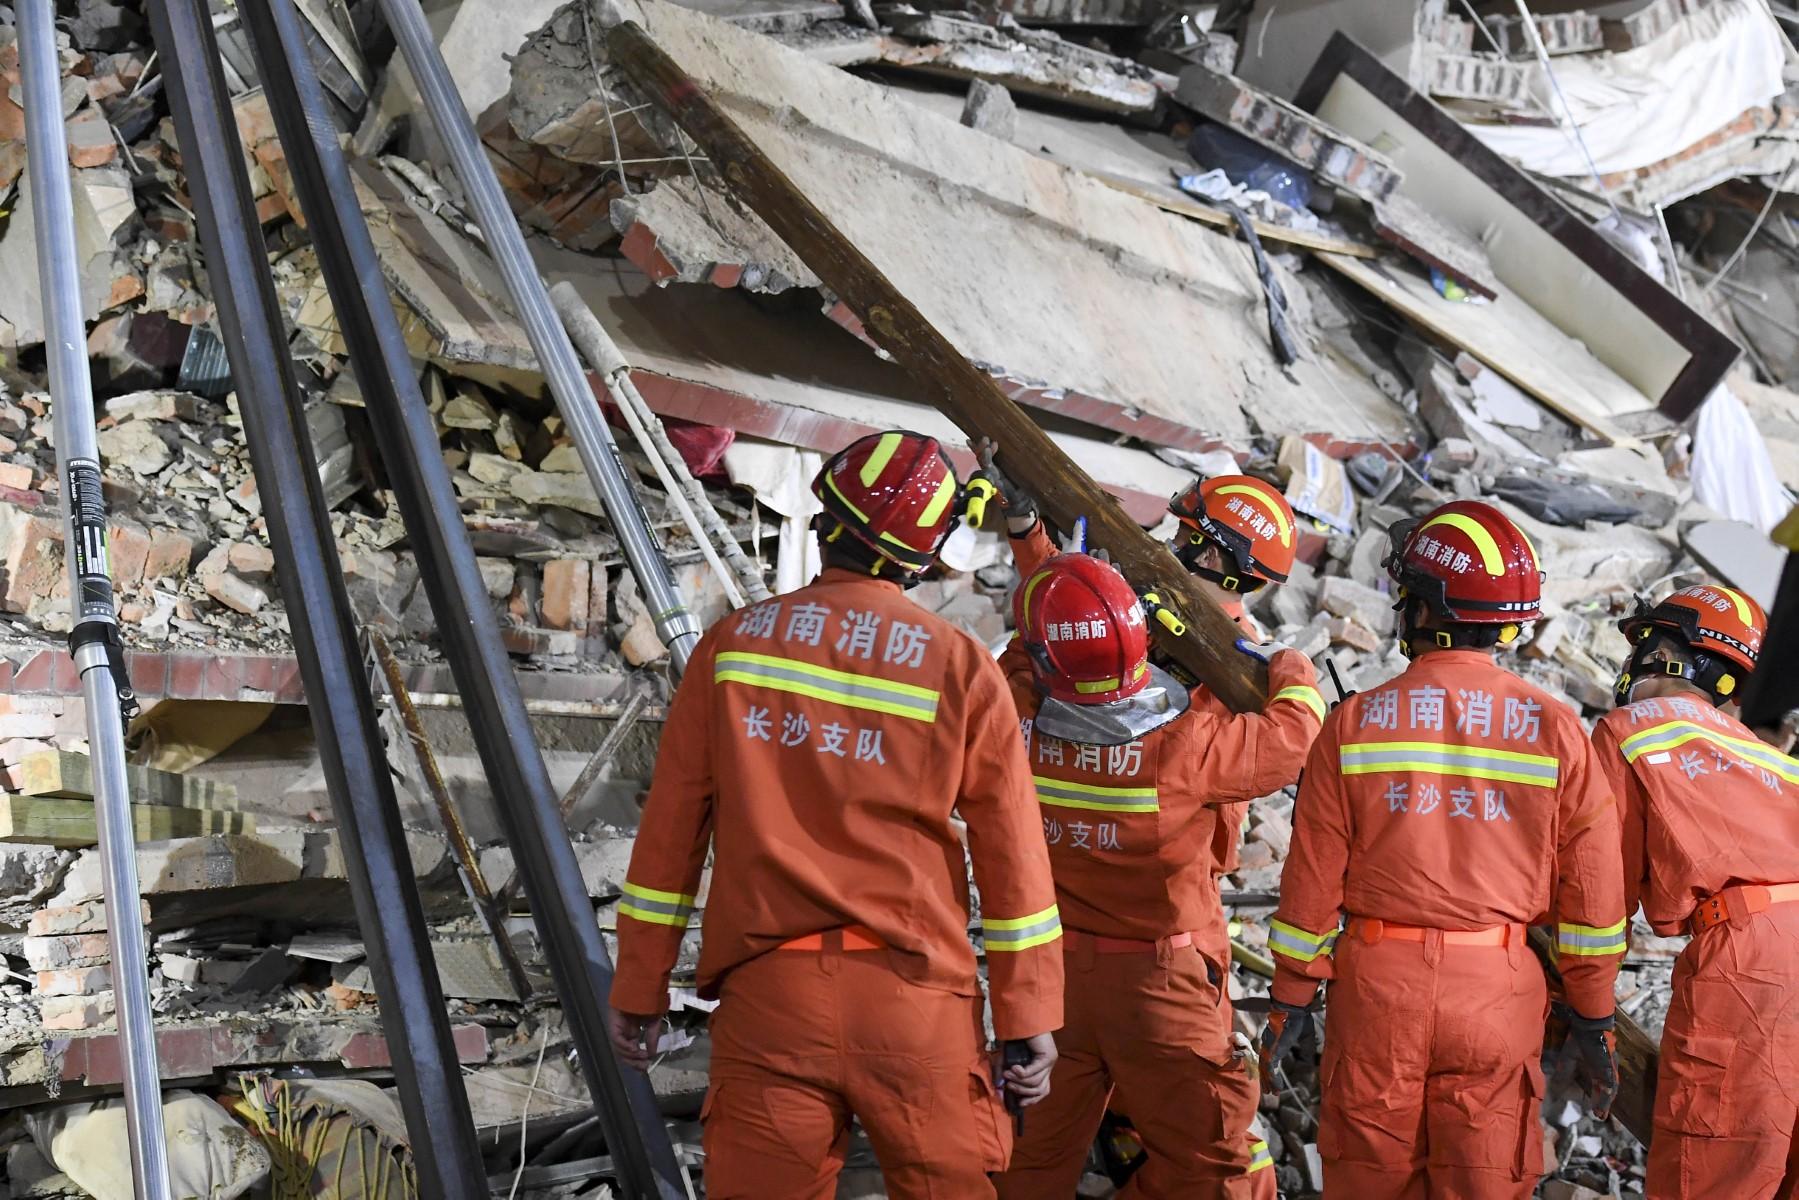 This photo taken on April 29 shows rescuers searching for survivors at a collapsed building in Changsha, central China’s Hunan province. Photo: AFP